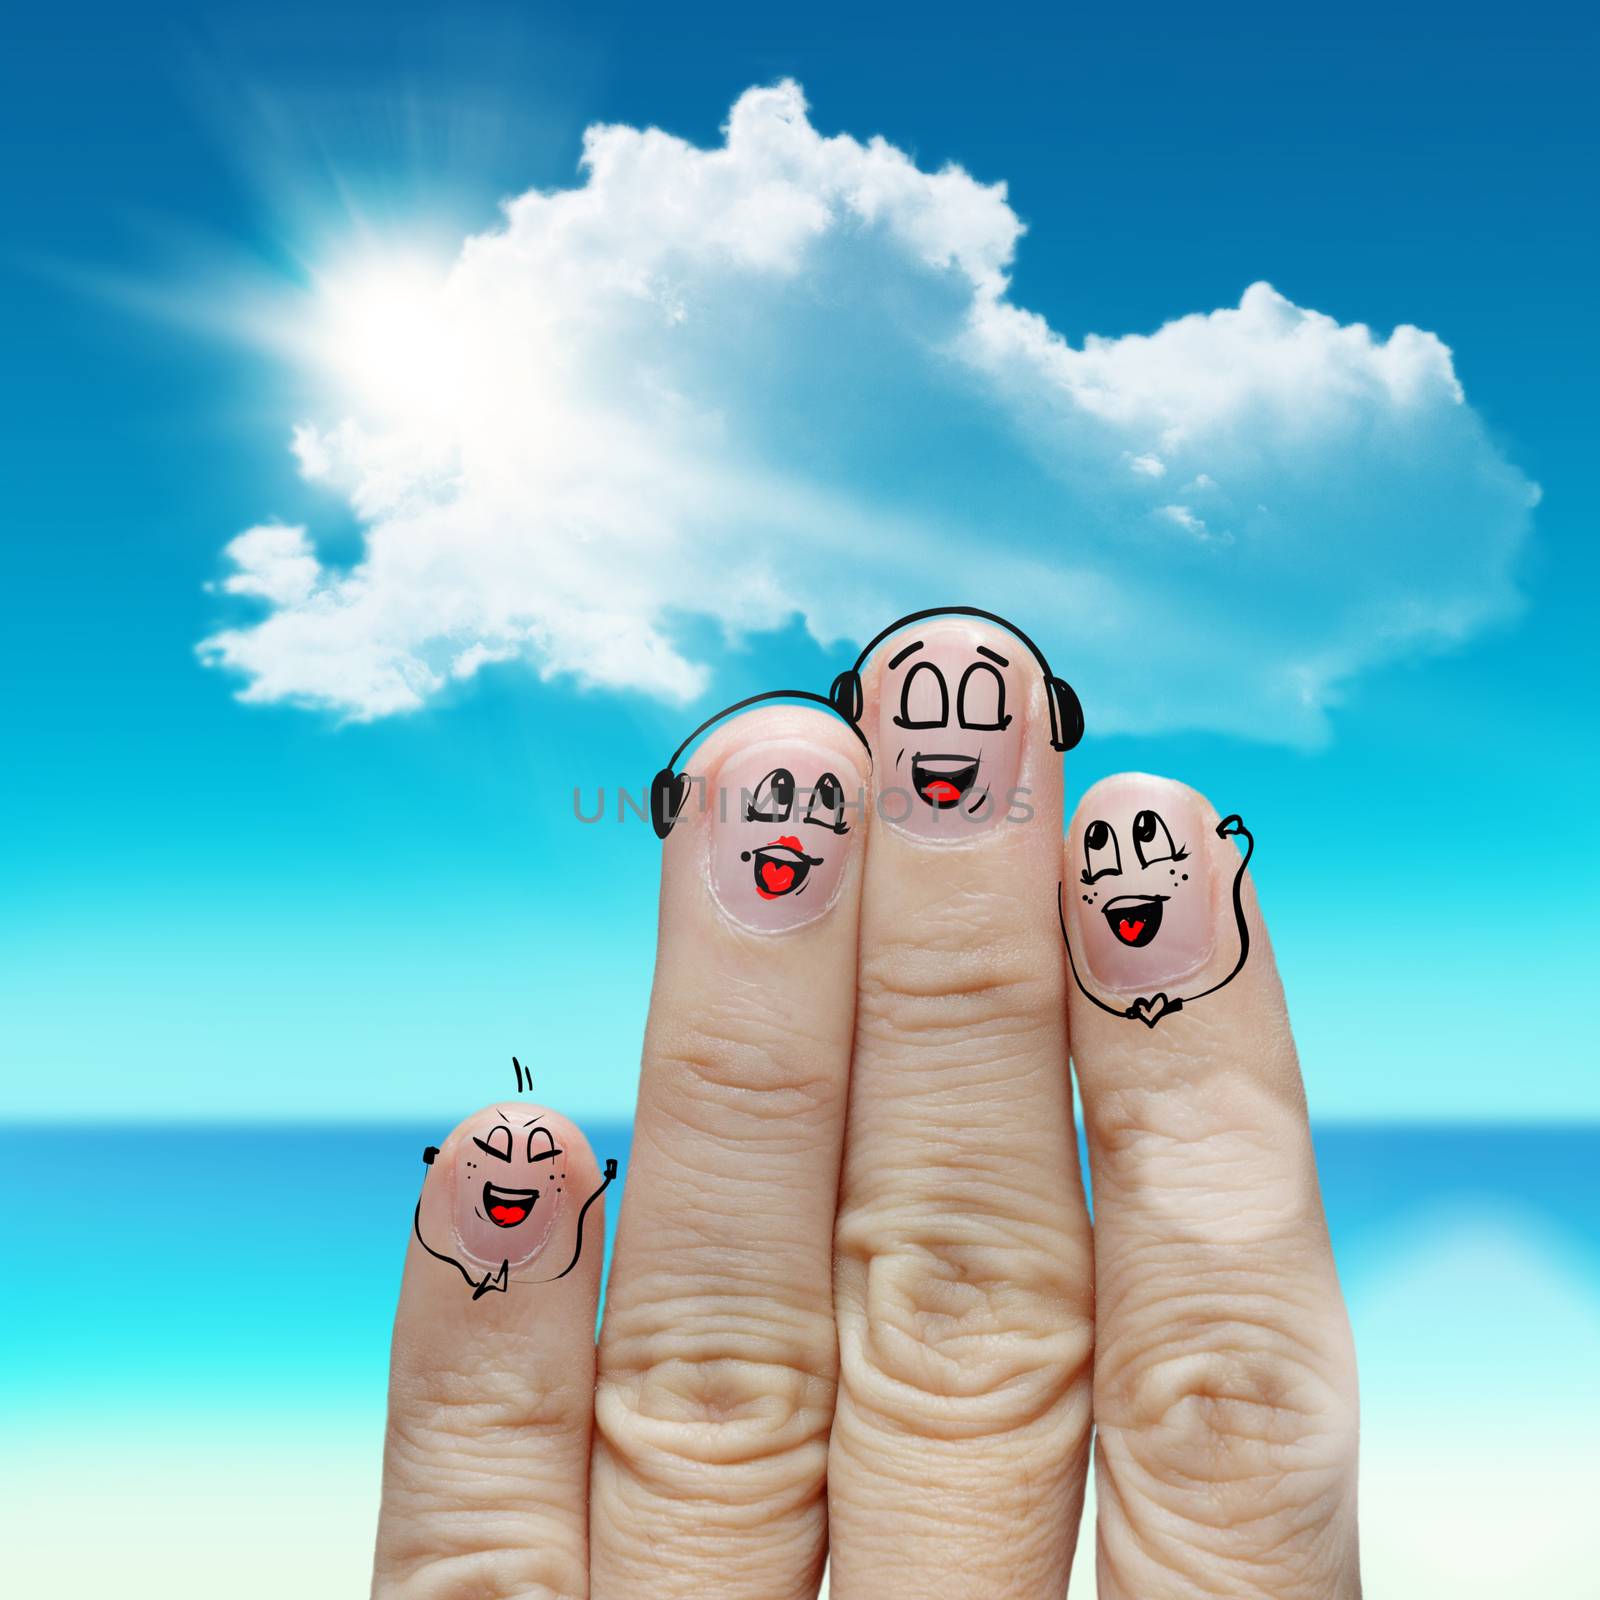 Finger family travels at the beach  by everythingpossible